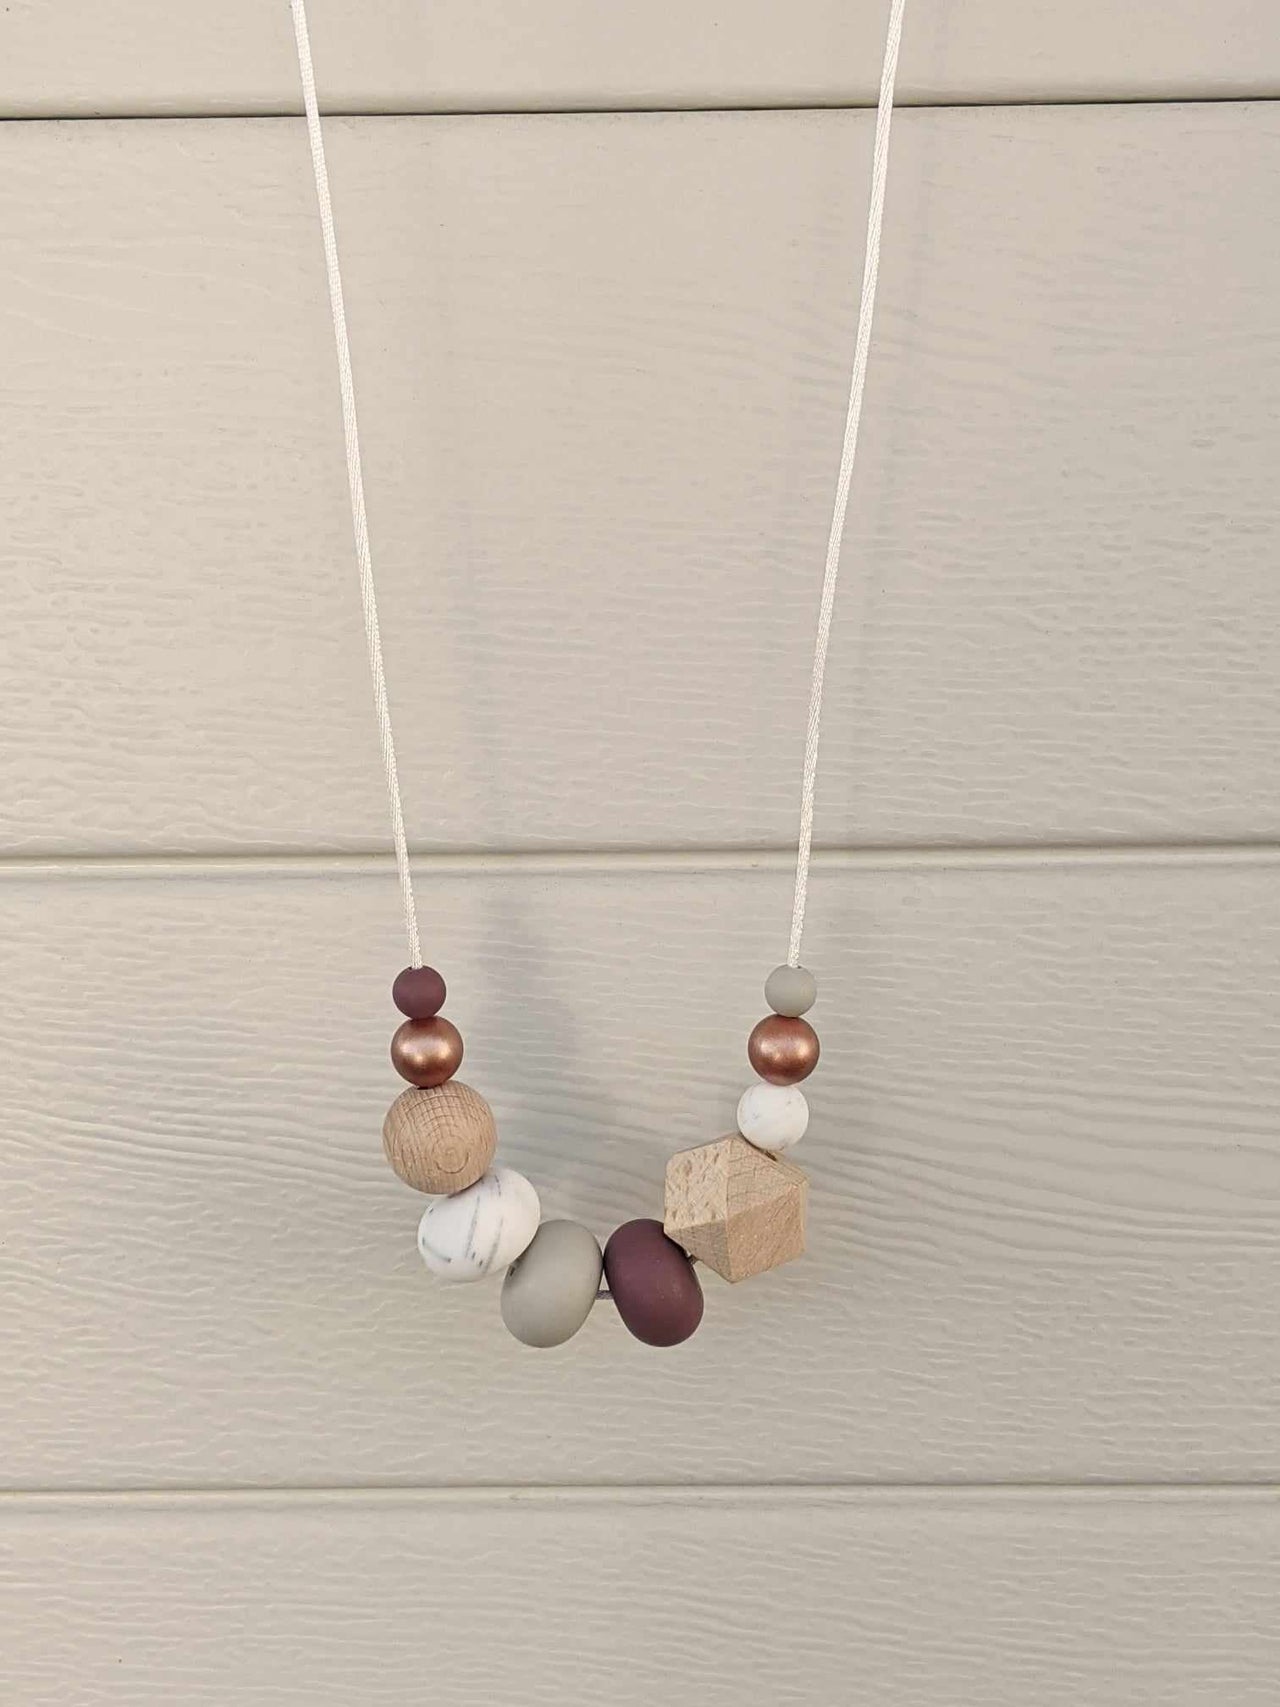 Lily Silicone Necklace  from Sprout Maternity maternity online store brisbane sydney perth australia